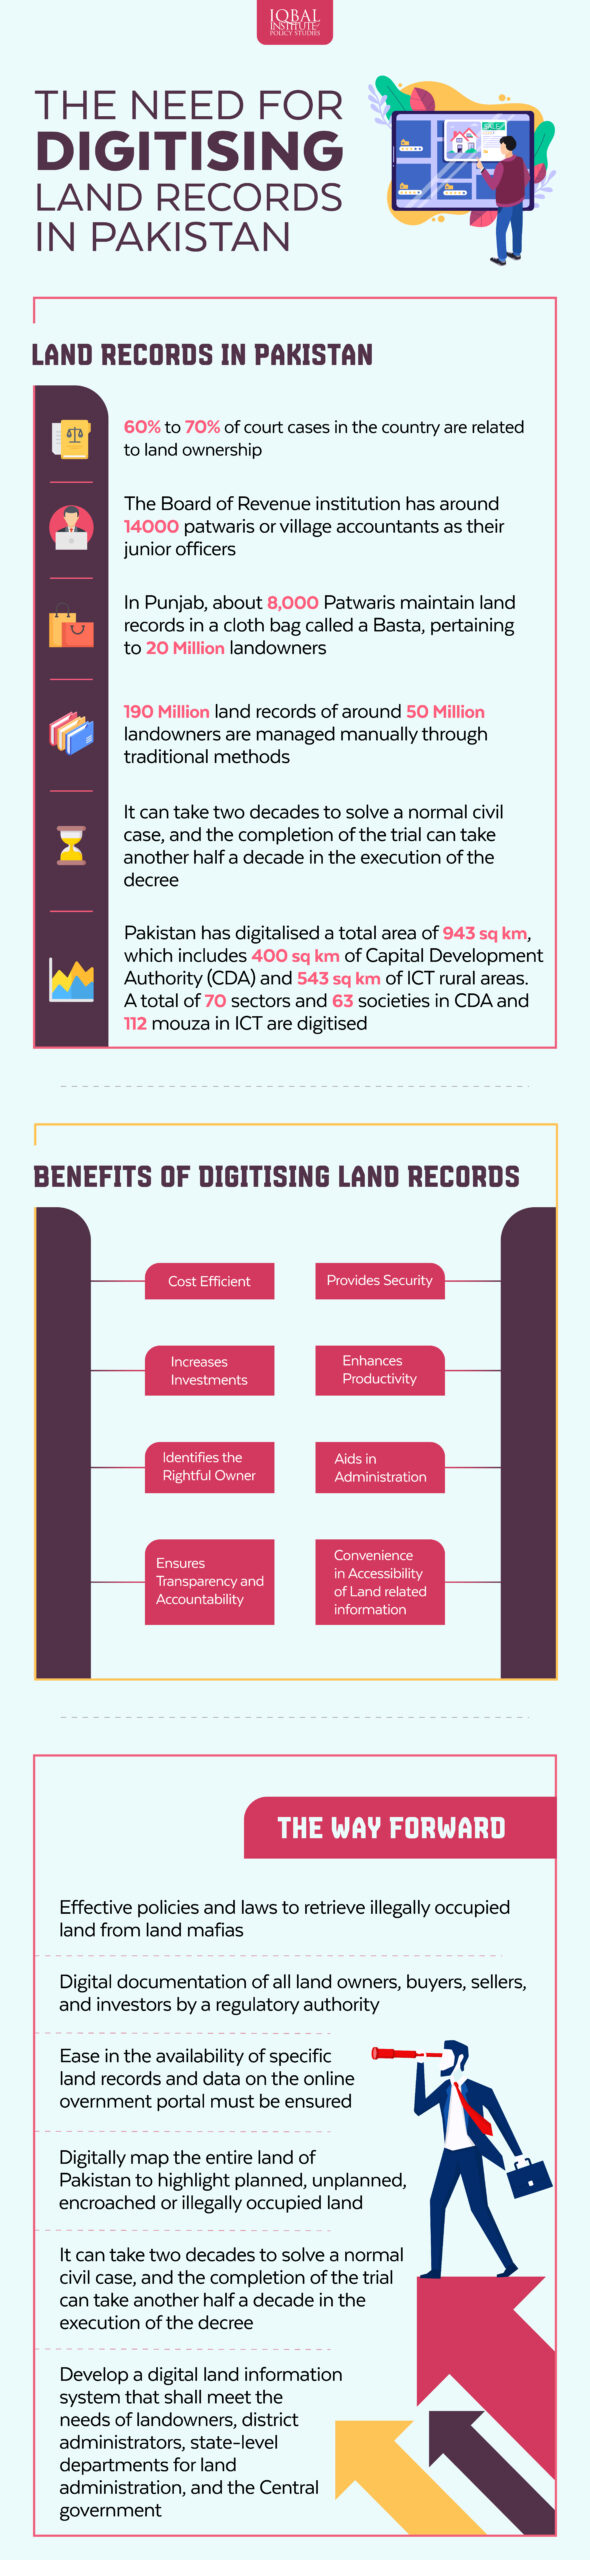 The Need for Digitising Land Records in Pakistan